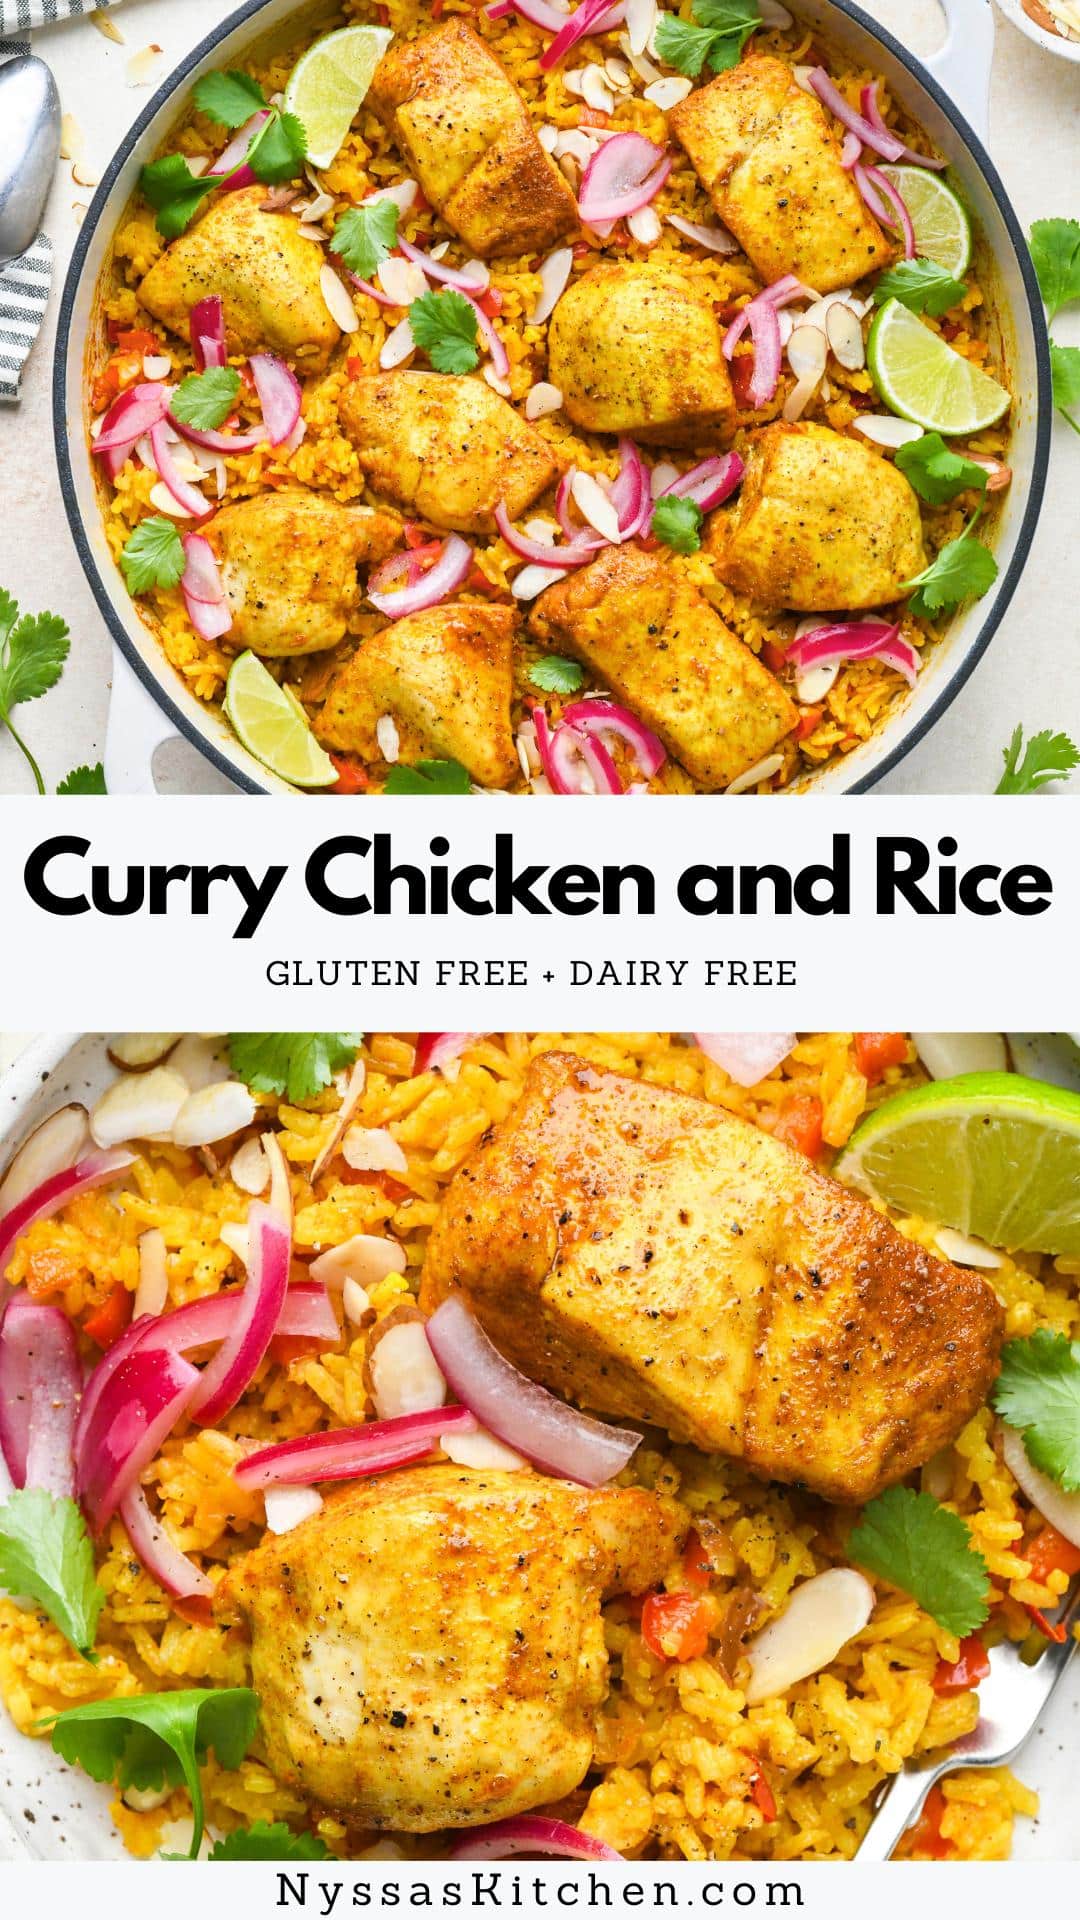 This curry chicken and rice is a flavorful and healthy meal prepared in just one pot and baked in the oven! Made with lean chicken breasts, bell peppers, onions, garlic, fluffy rice, and plenty of flavorful spices, it is satisfying and delicious (& made without coconut milk). It comes together around one hour with prep time included and reheats well if you have leftovers. Take advantage of the colorful and punchy garnishes to bring out all the flavorful nuances of the dish!